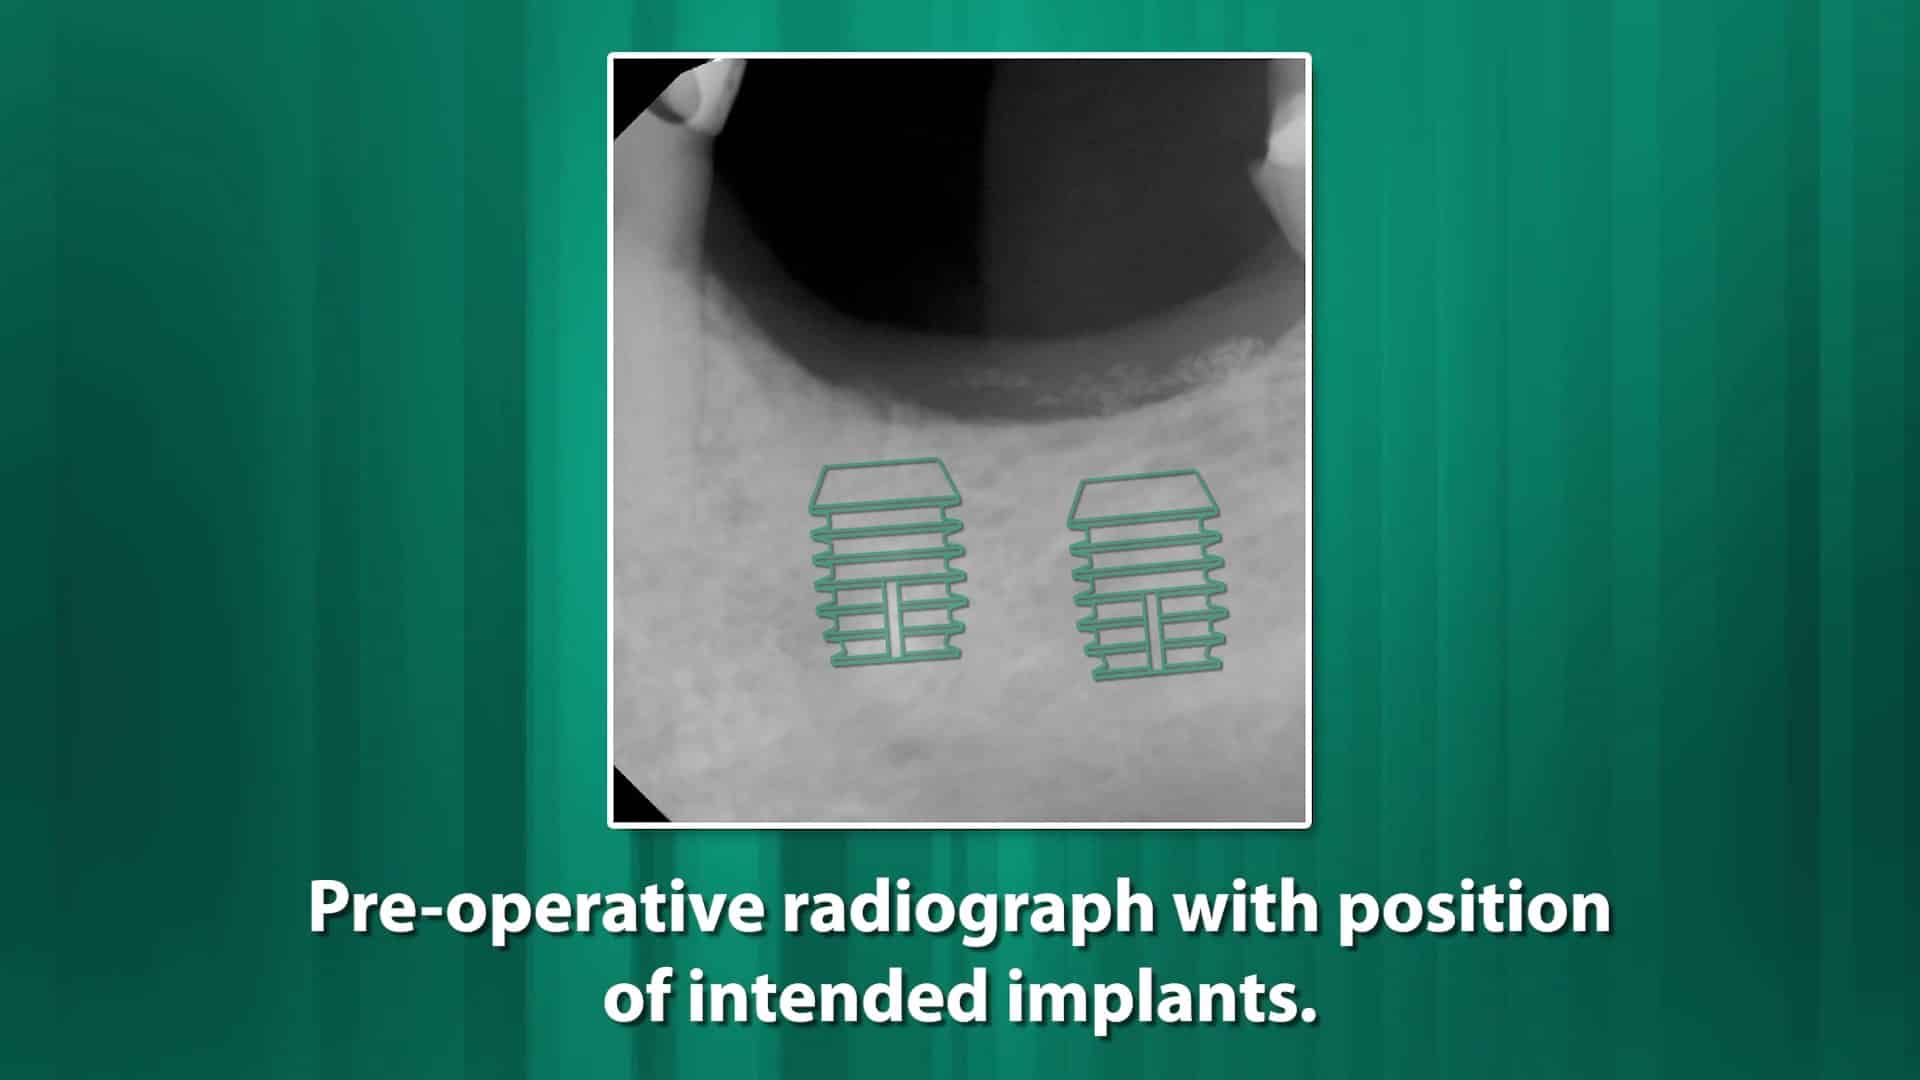 One Stage Placement Of Two Adjacent X Mm Short Implants For Mandibular Premolars Bicon